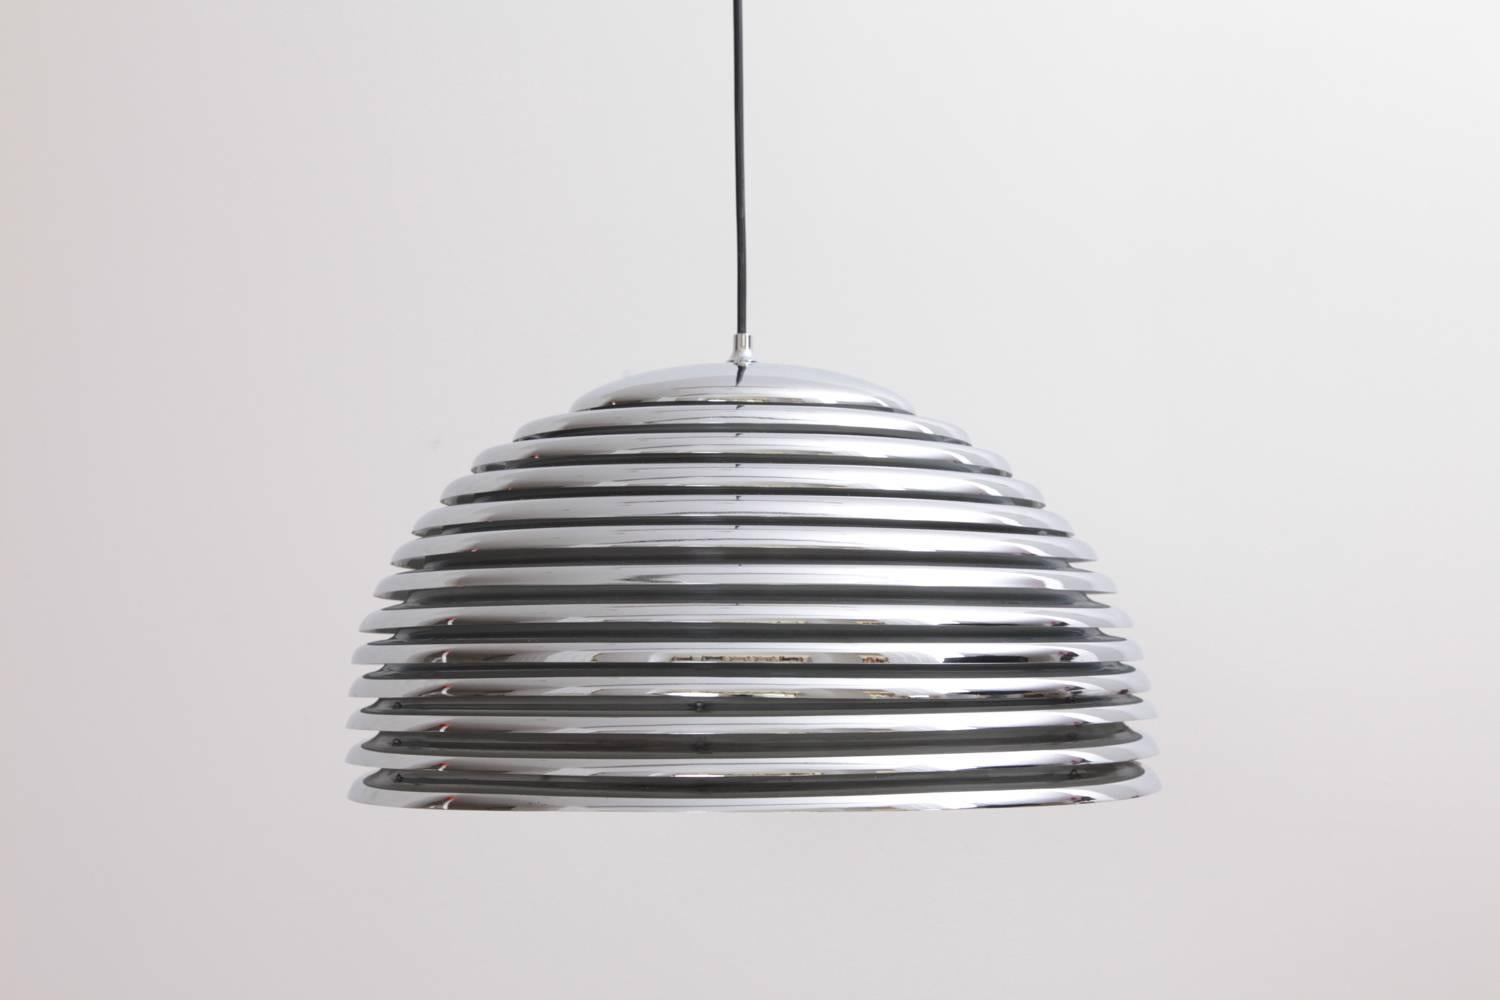 Rare large version of the Kazuo Motozawa Saturno pendant light by Staff in chrome. The inside lacquer is peeling off. That does not affect the beautiful light.
Fully original. 4x E27/Model A.
To be on the safe side, the lamp should be checked